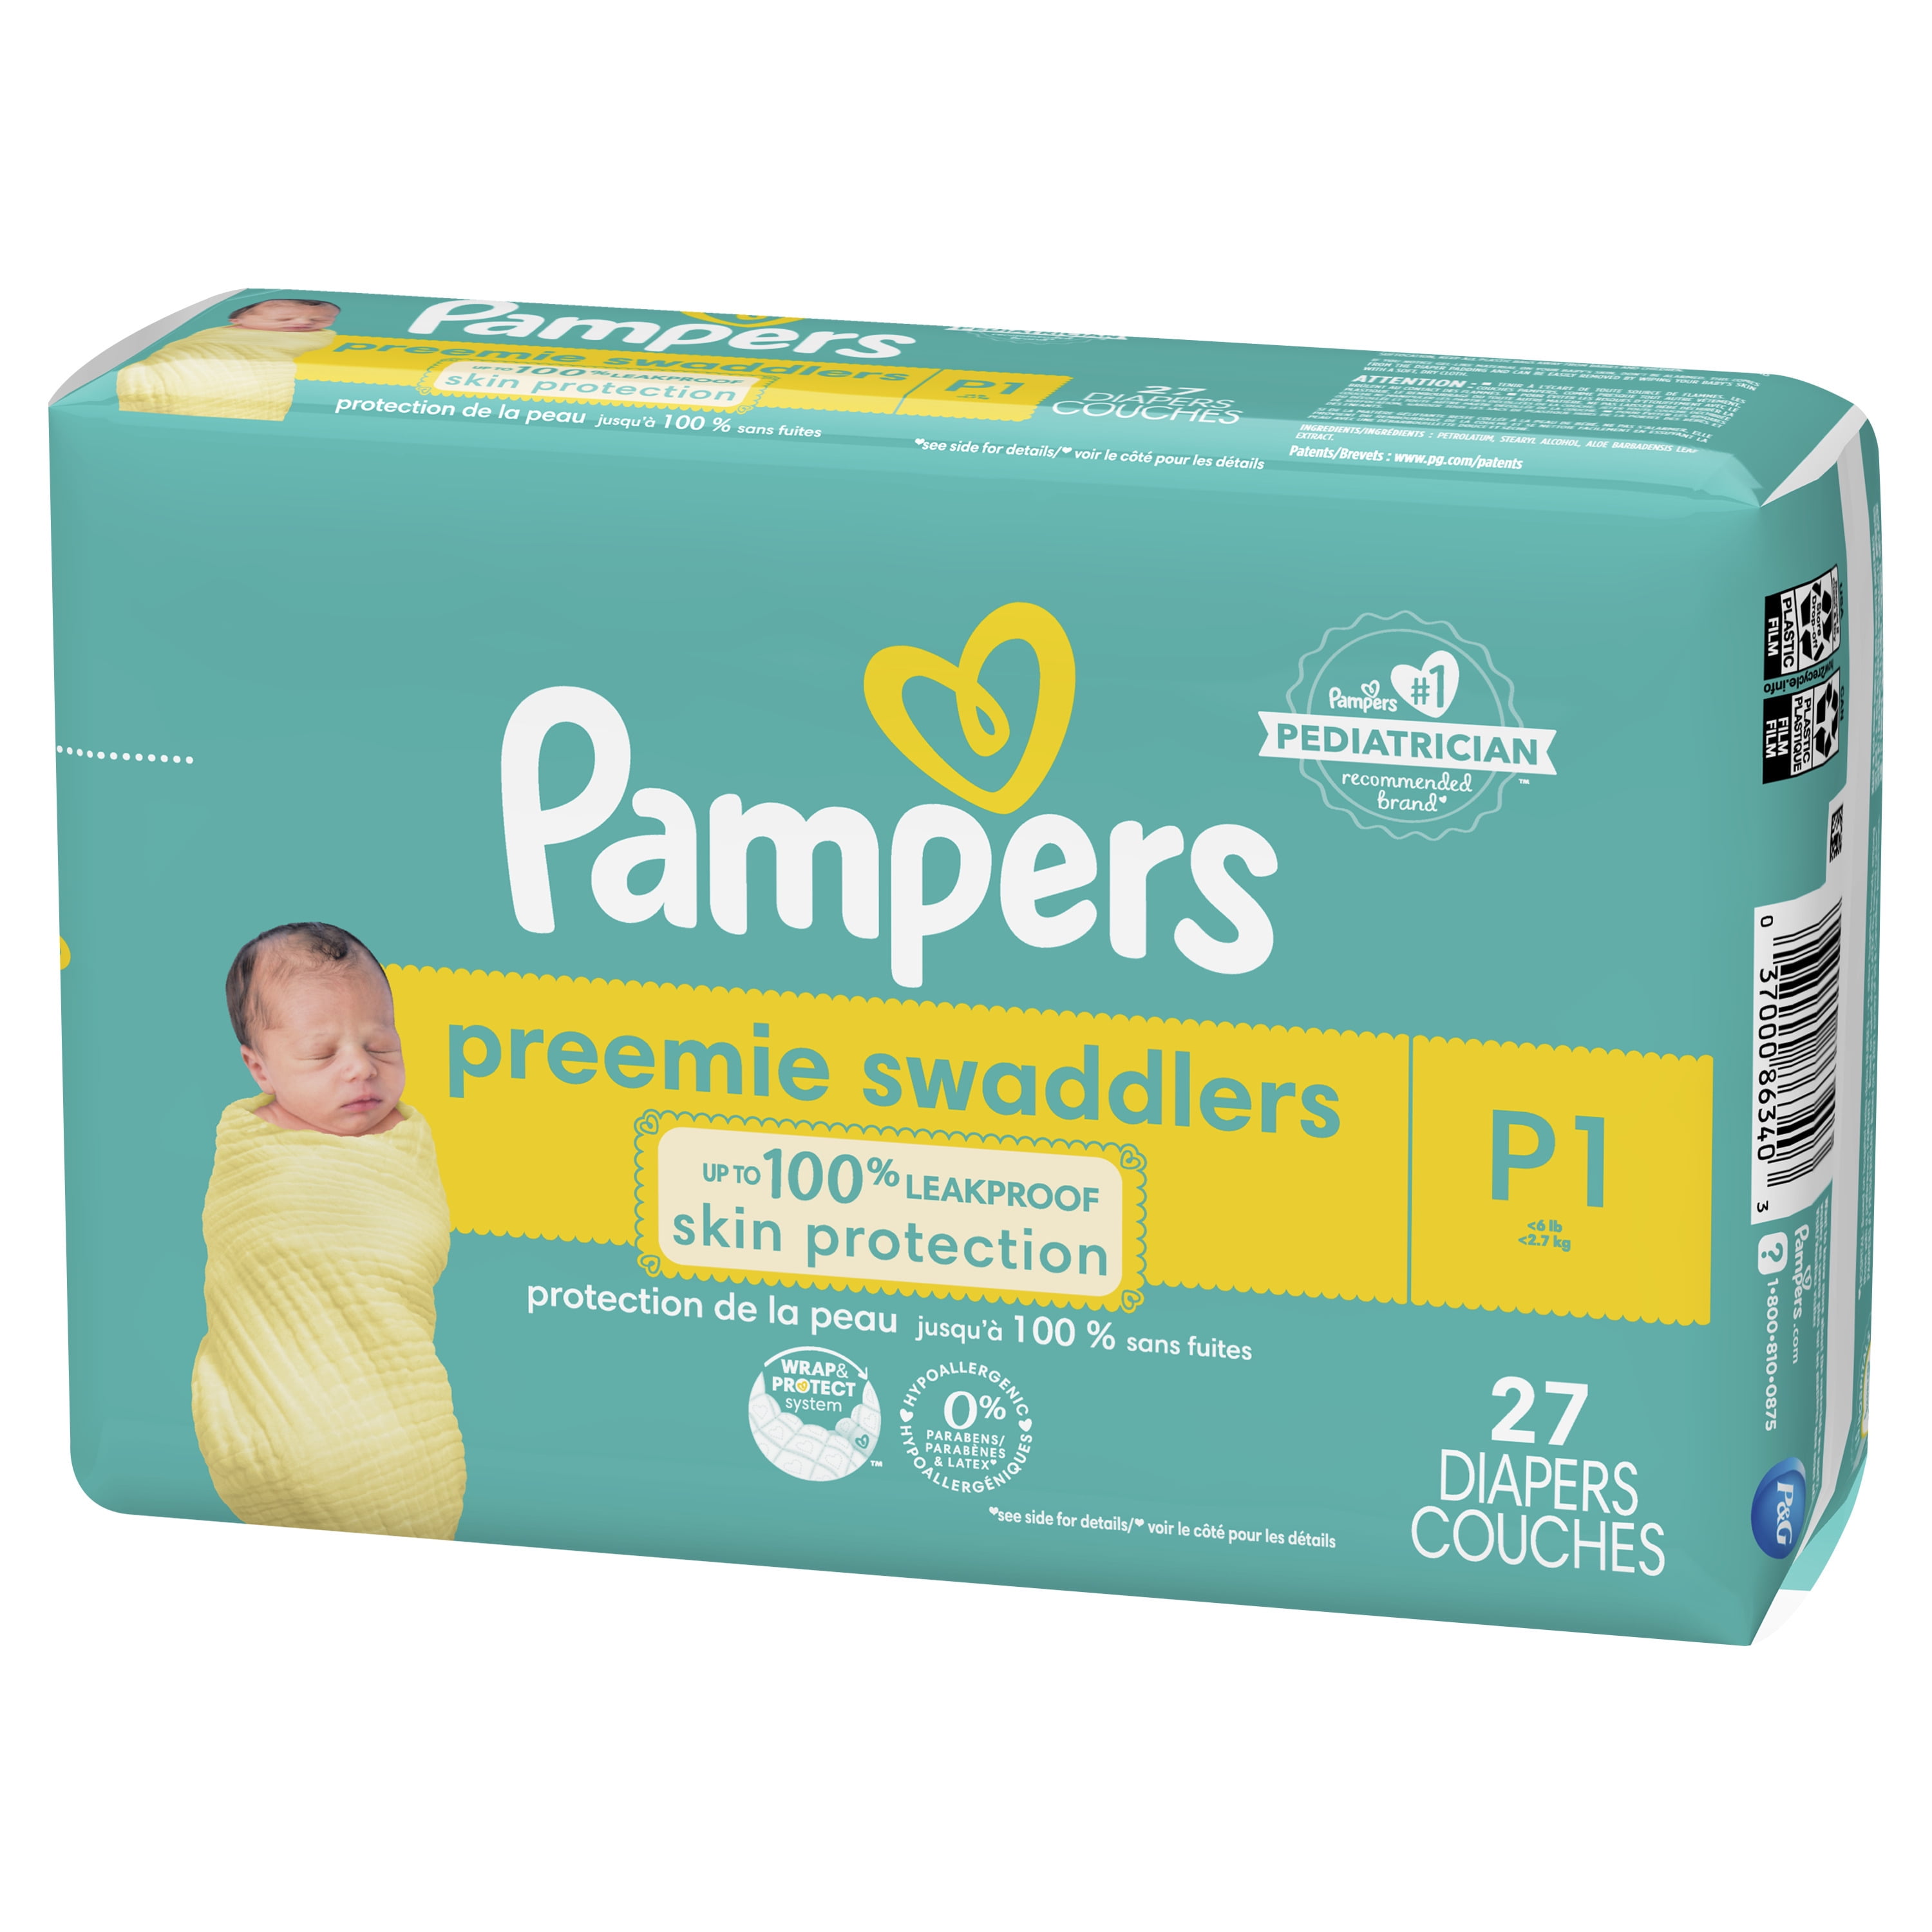 Pampers - Pampers, Swaddlers - Swaddlers Diaper Size 7 70 Count (70 ct), Grocery Pickup & Delivery